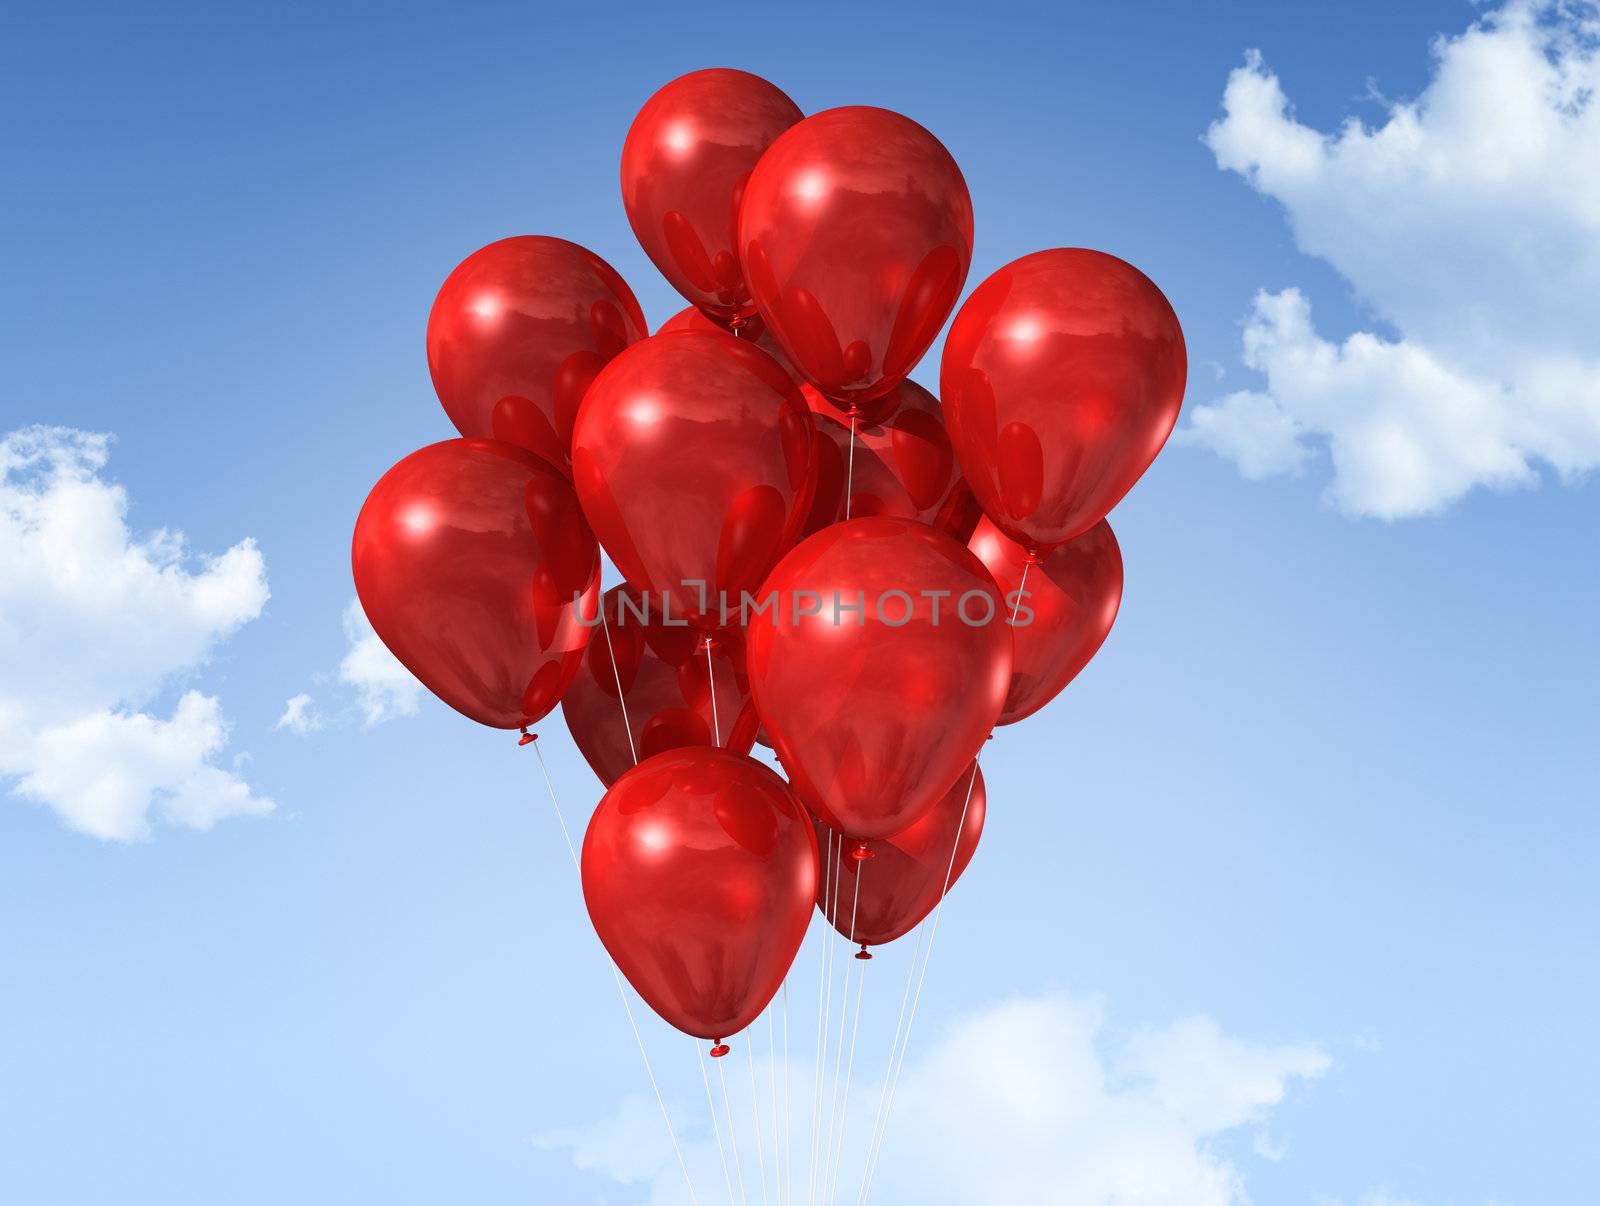 red balloons on a blue sky by daboost